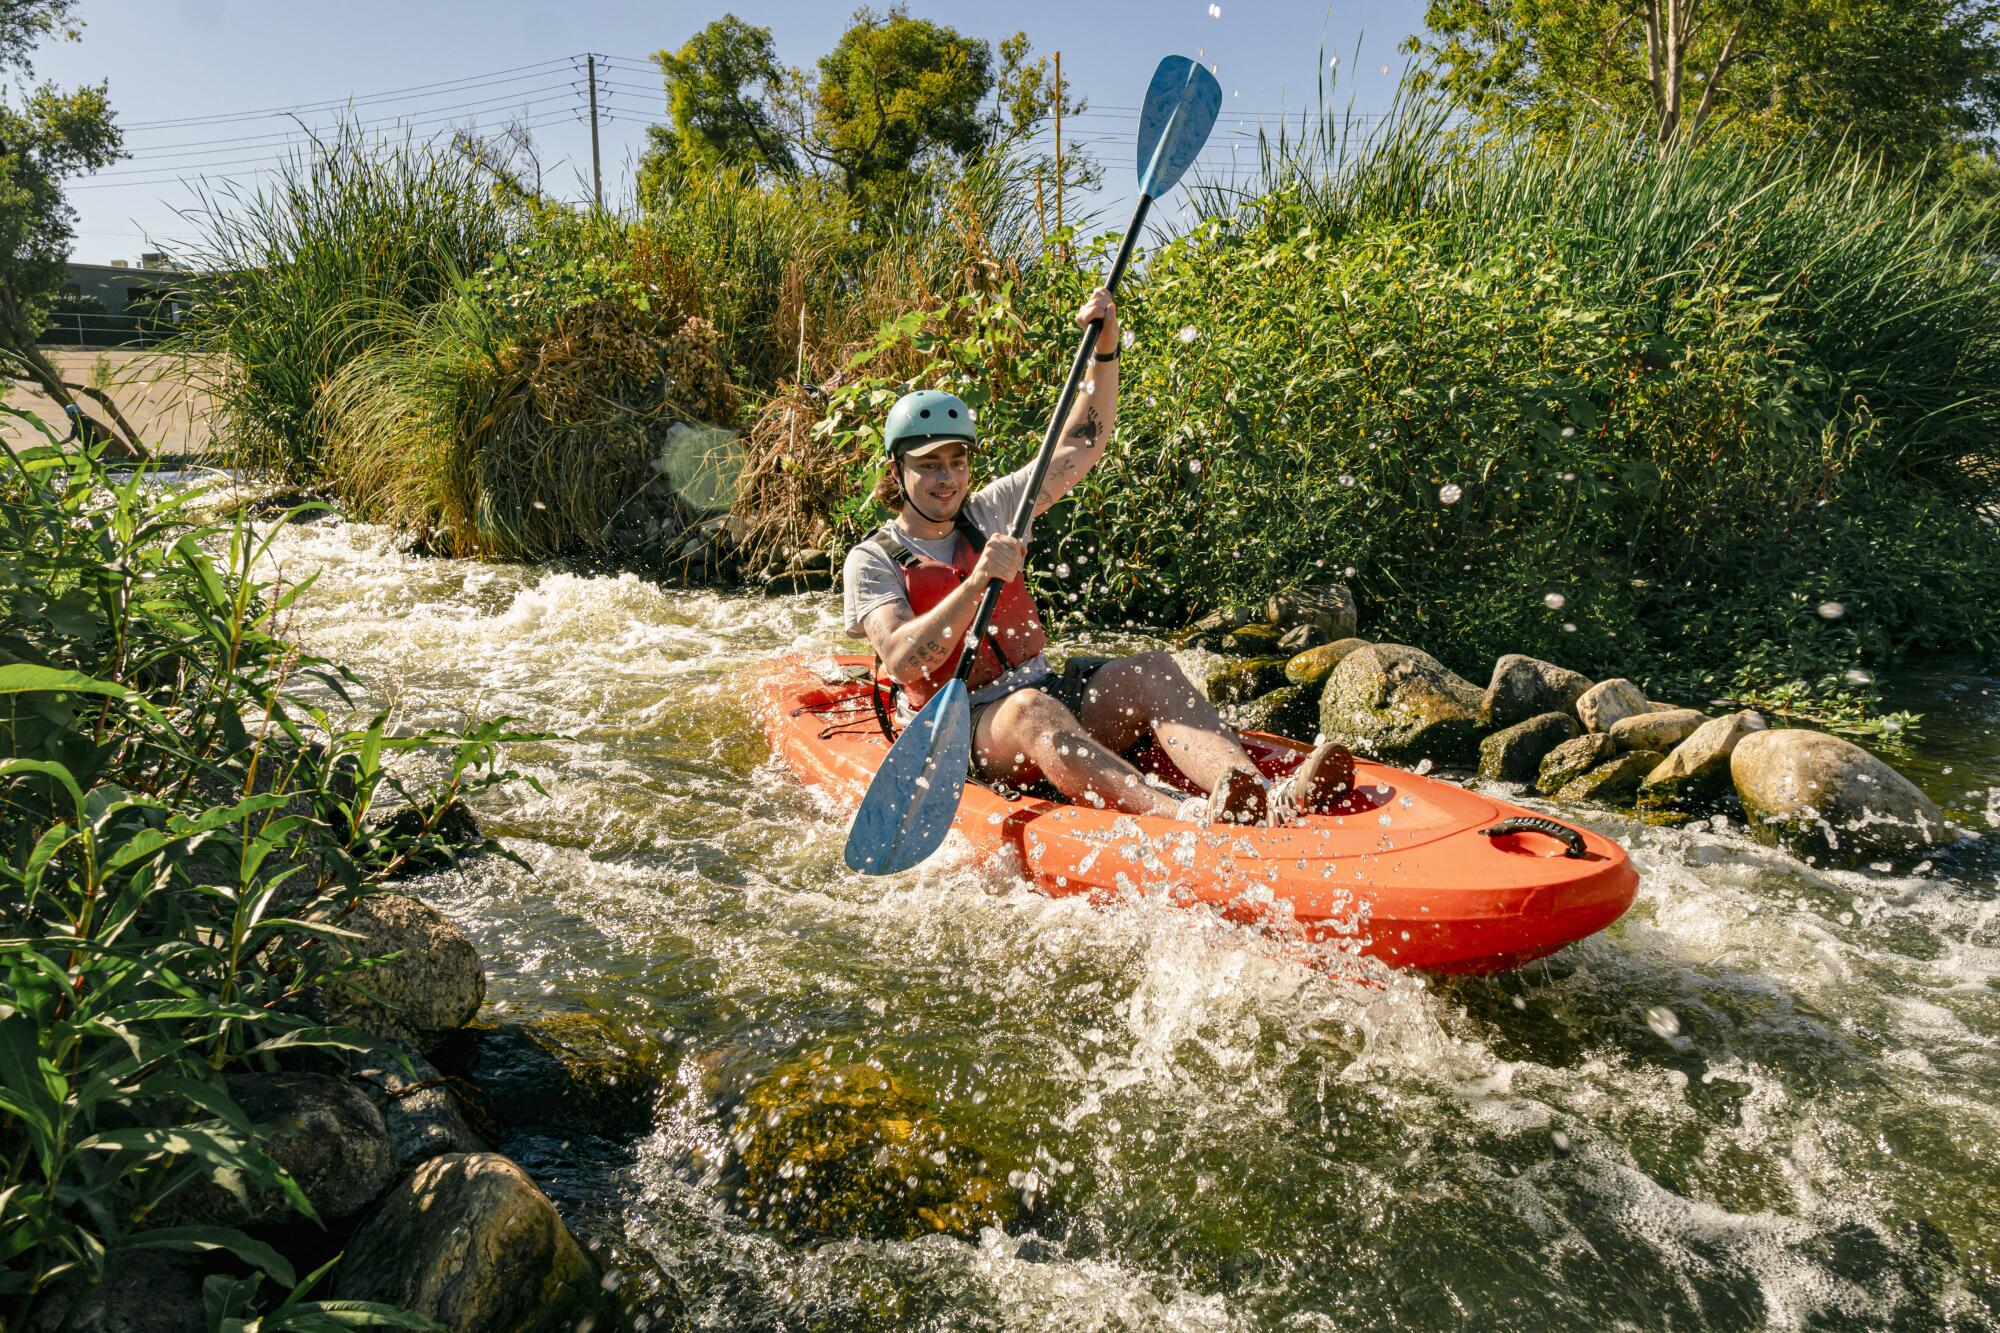 A man kayaks through rapids on the Los Angeles River.